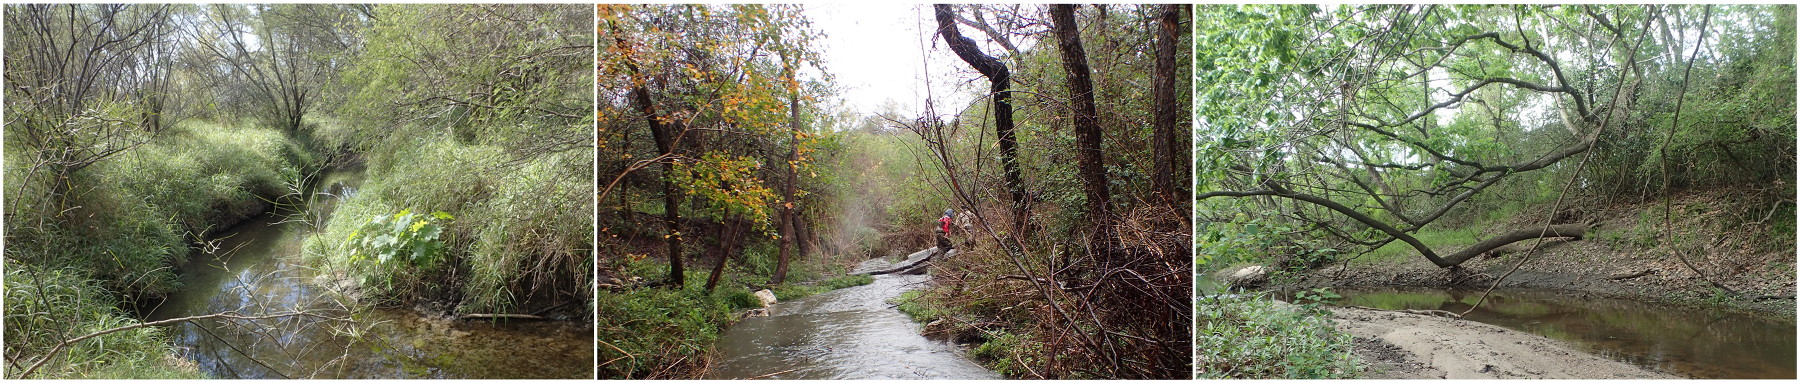 Three coastal rivers along a climate gradient in South Texas (left to right): San Fernando Creek (semi-arid climate), Aransasa River (transitional climate between mesic and semi-arid), and Garcitas Creek (mesic climate).